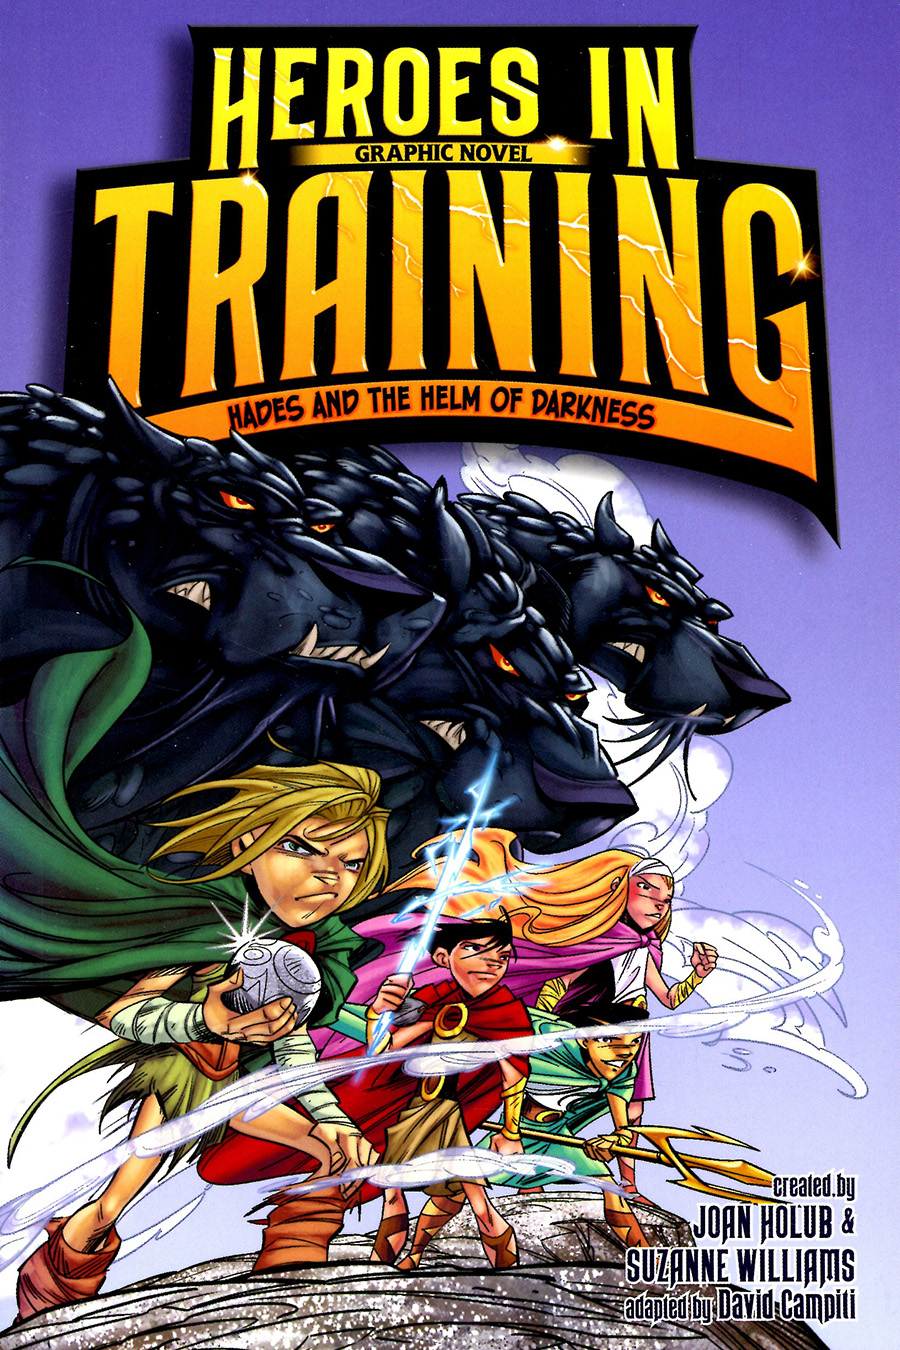 Heroes In Training Vol 3 Hades And The Helm Of Darkness TP